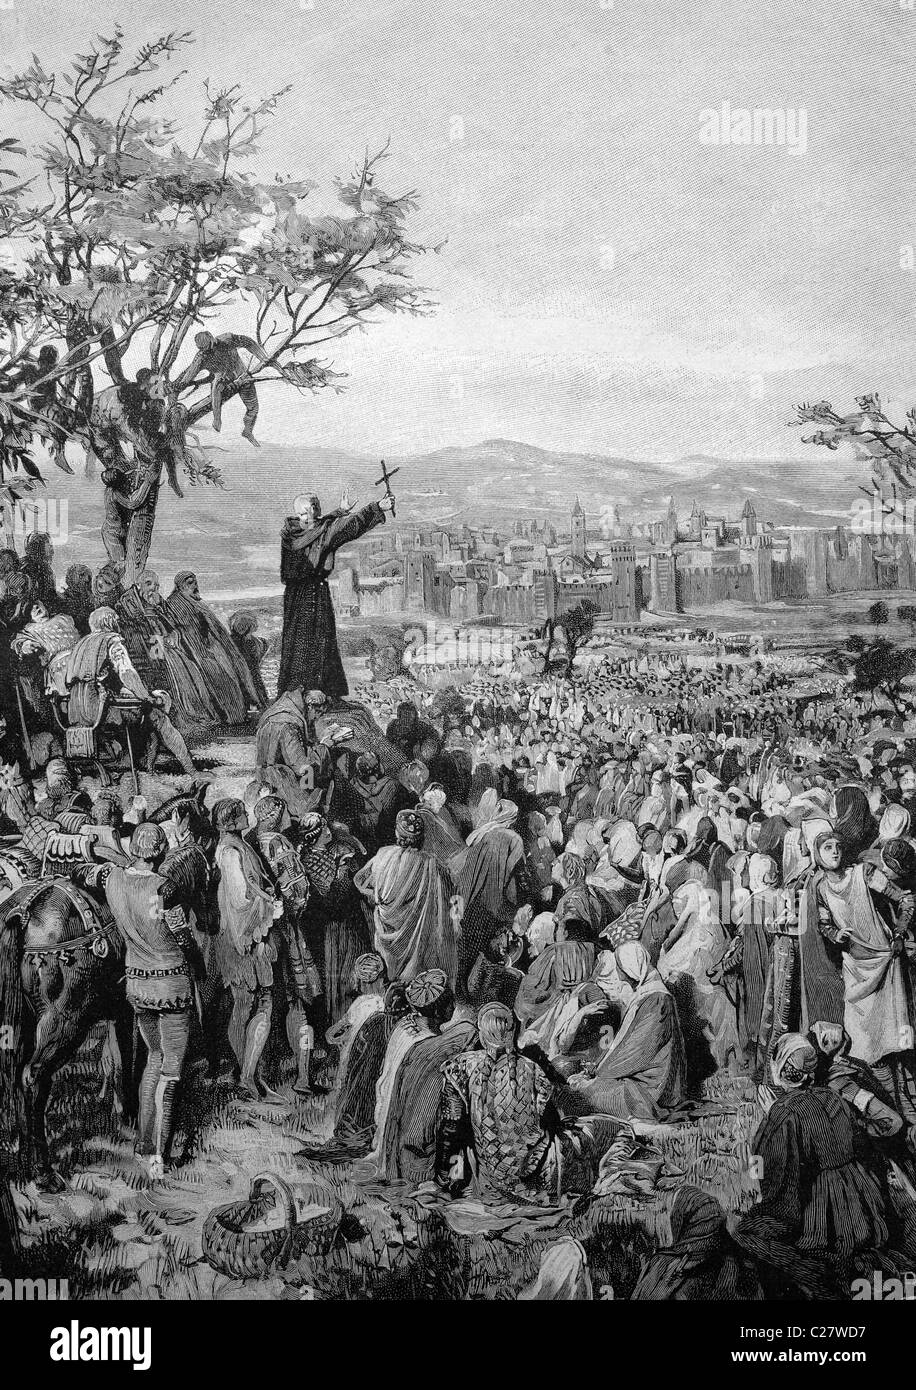 John of Piacenza preaching for peace, historical illustration, ca. 1893 Stock Photo